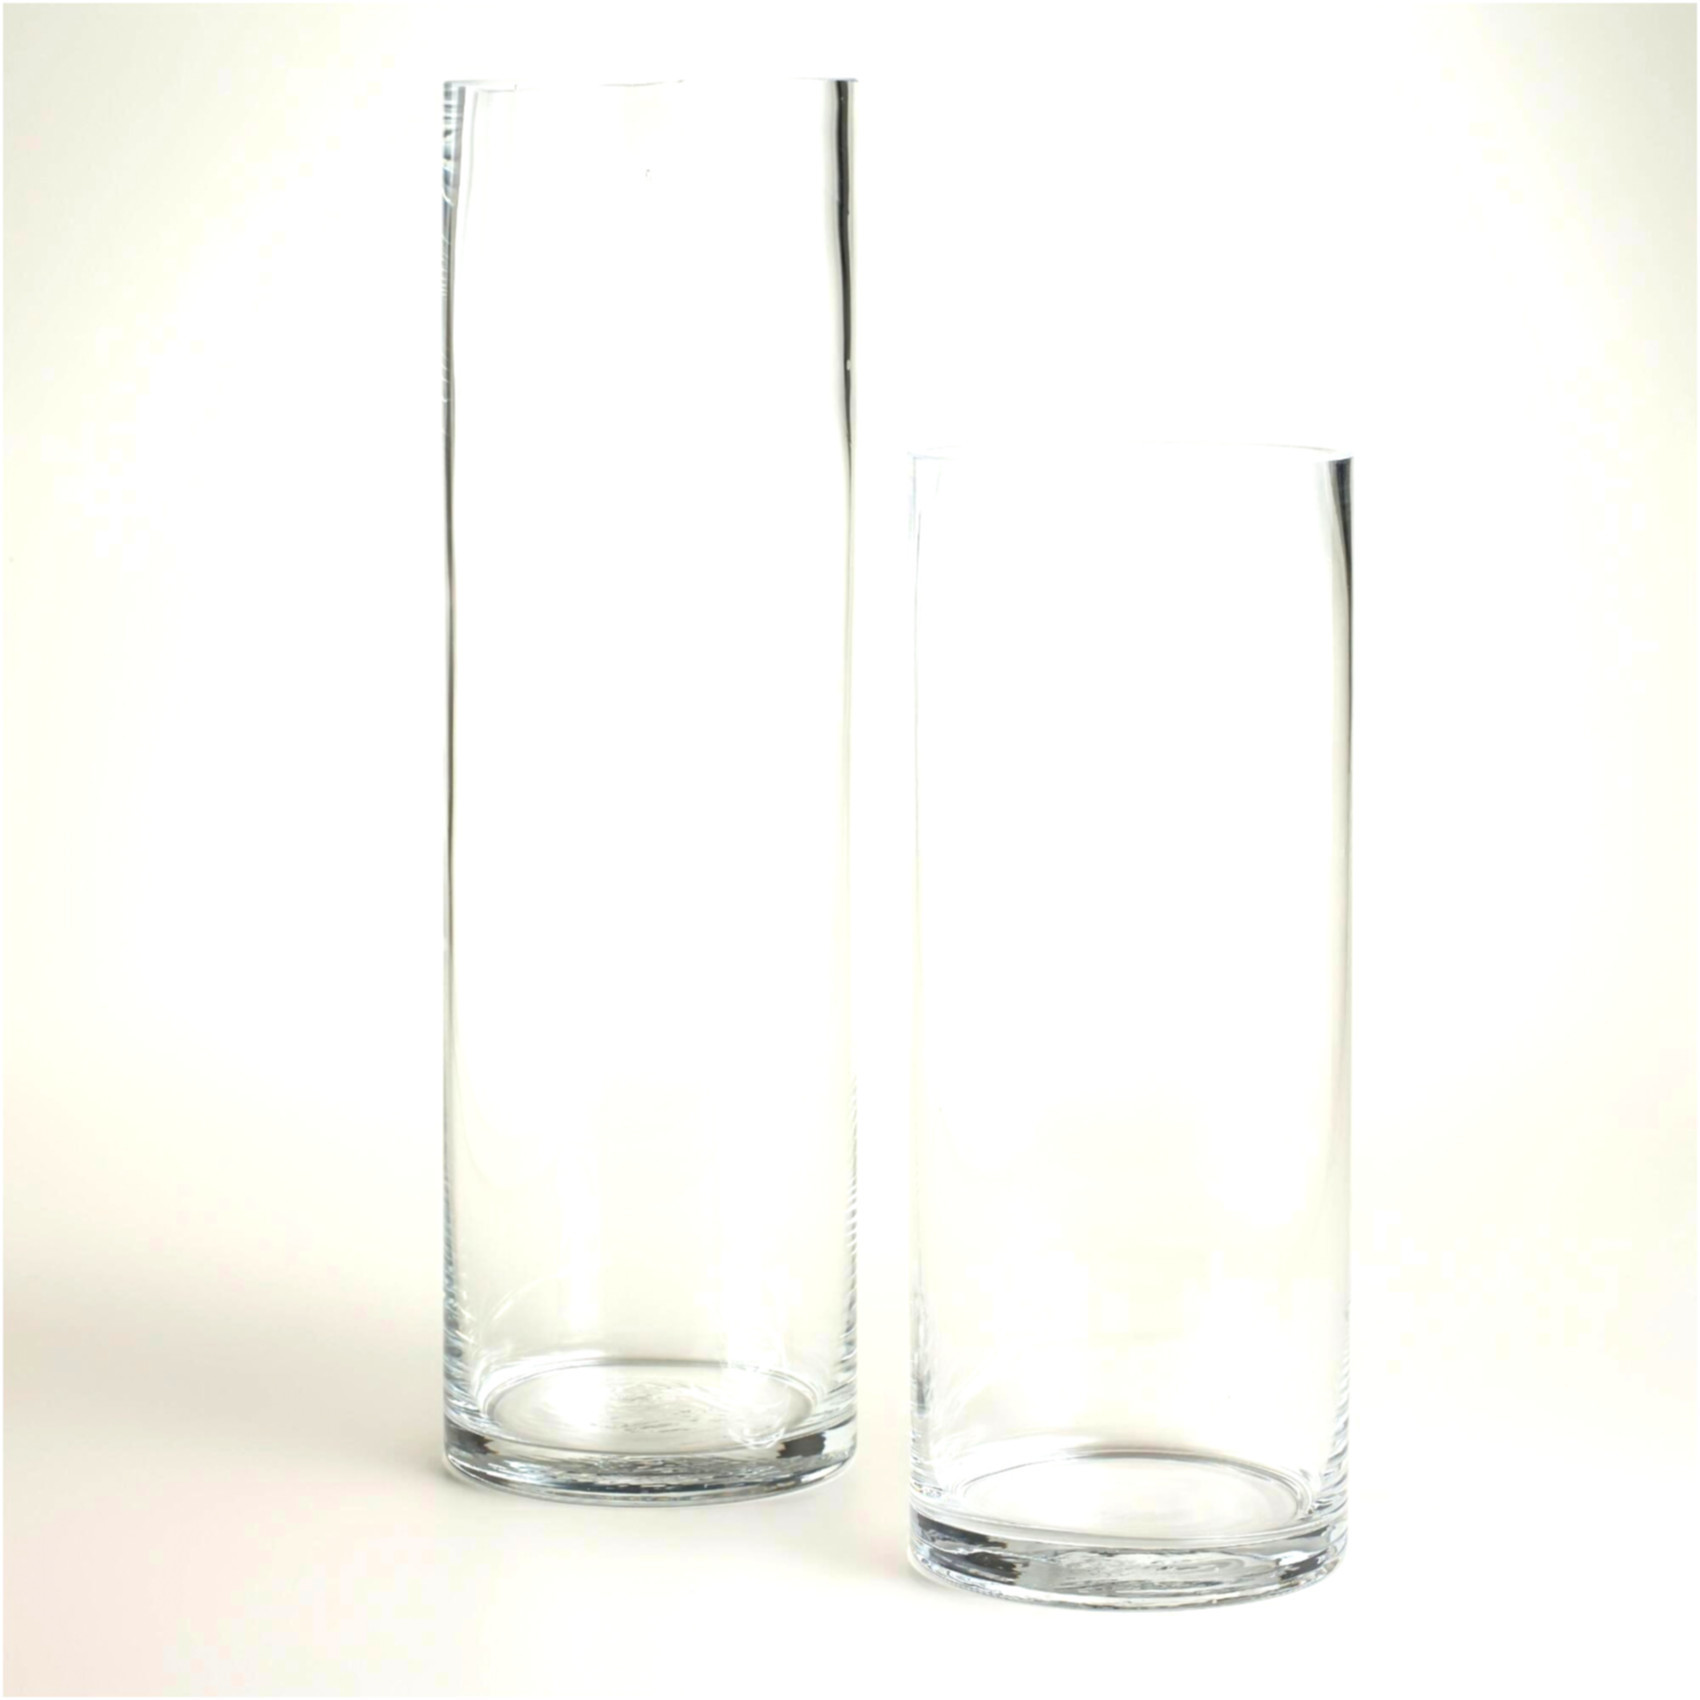 17 Awesome 24 Inch Tall Cylinder Vases 2024 free download 24 inch tall cylinder vases of why you should not go to glass vases wholesale glass vases inside crystal glass vases wholesale inspirational 30 elegant vases with